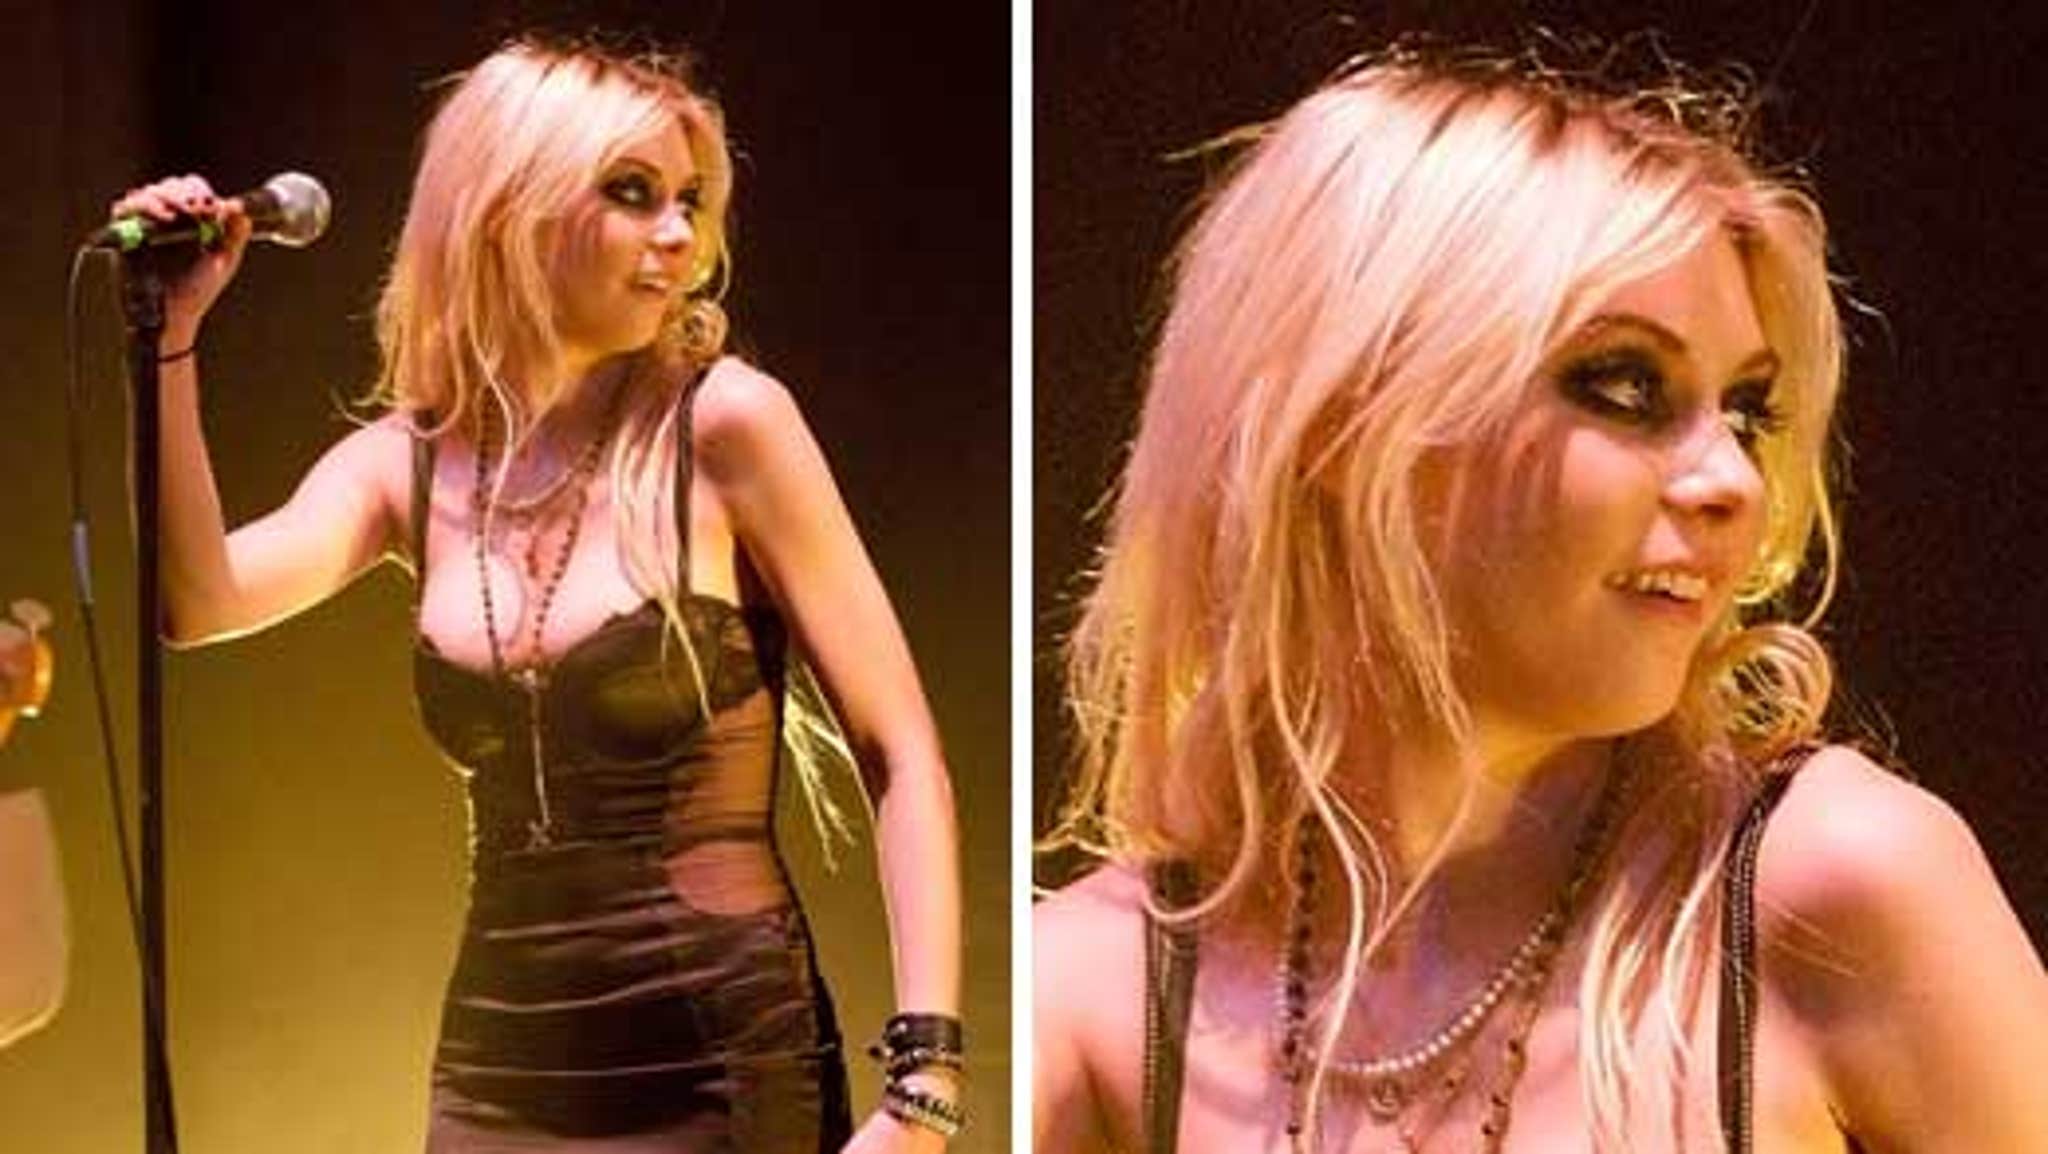 Taylor Momsen Strips Down, Goes Nude in New Video